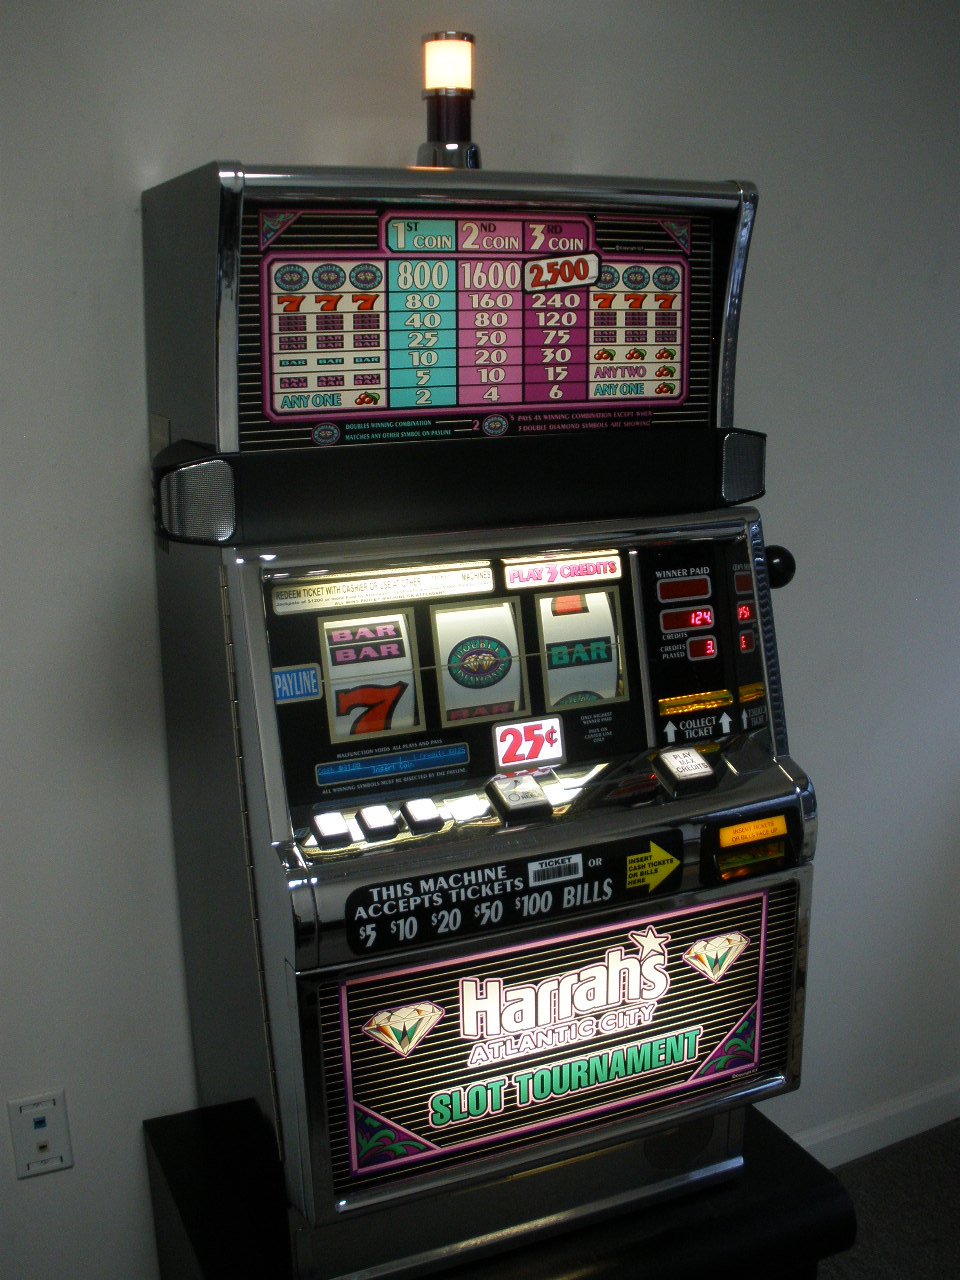 https://www.gamblersoasisusa.com/resize/Shared/Images/Product/IGT-DOUBLE-DIAMOND-FLAT-TOP-S2000-SLOT-MACHINE-with-HARRAH-S-SLOT-TOURNAMENT-BOTTOM/P8100256.jpg?bw=1000&w=1000&bh=1000&h=1000